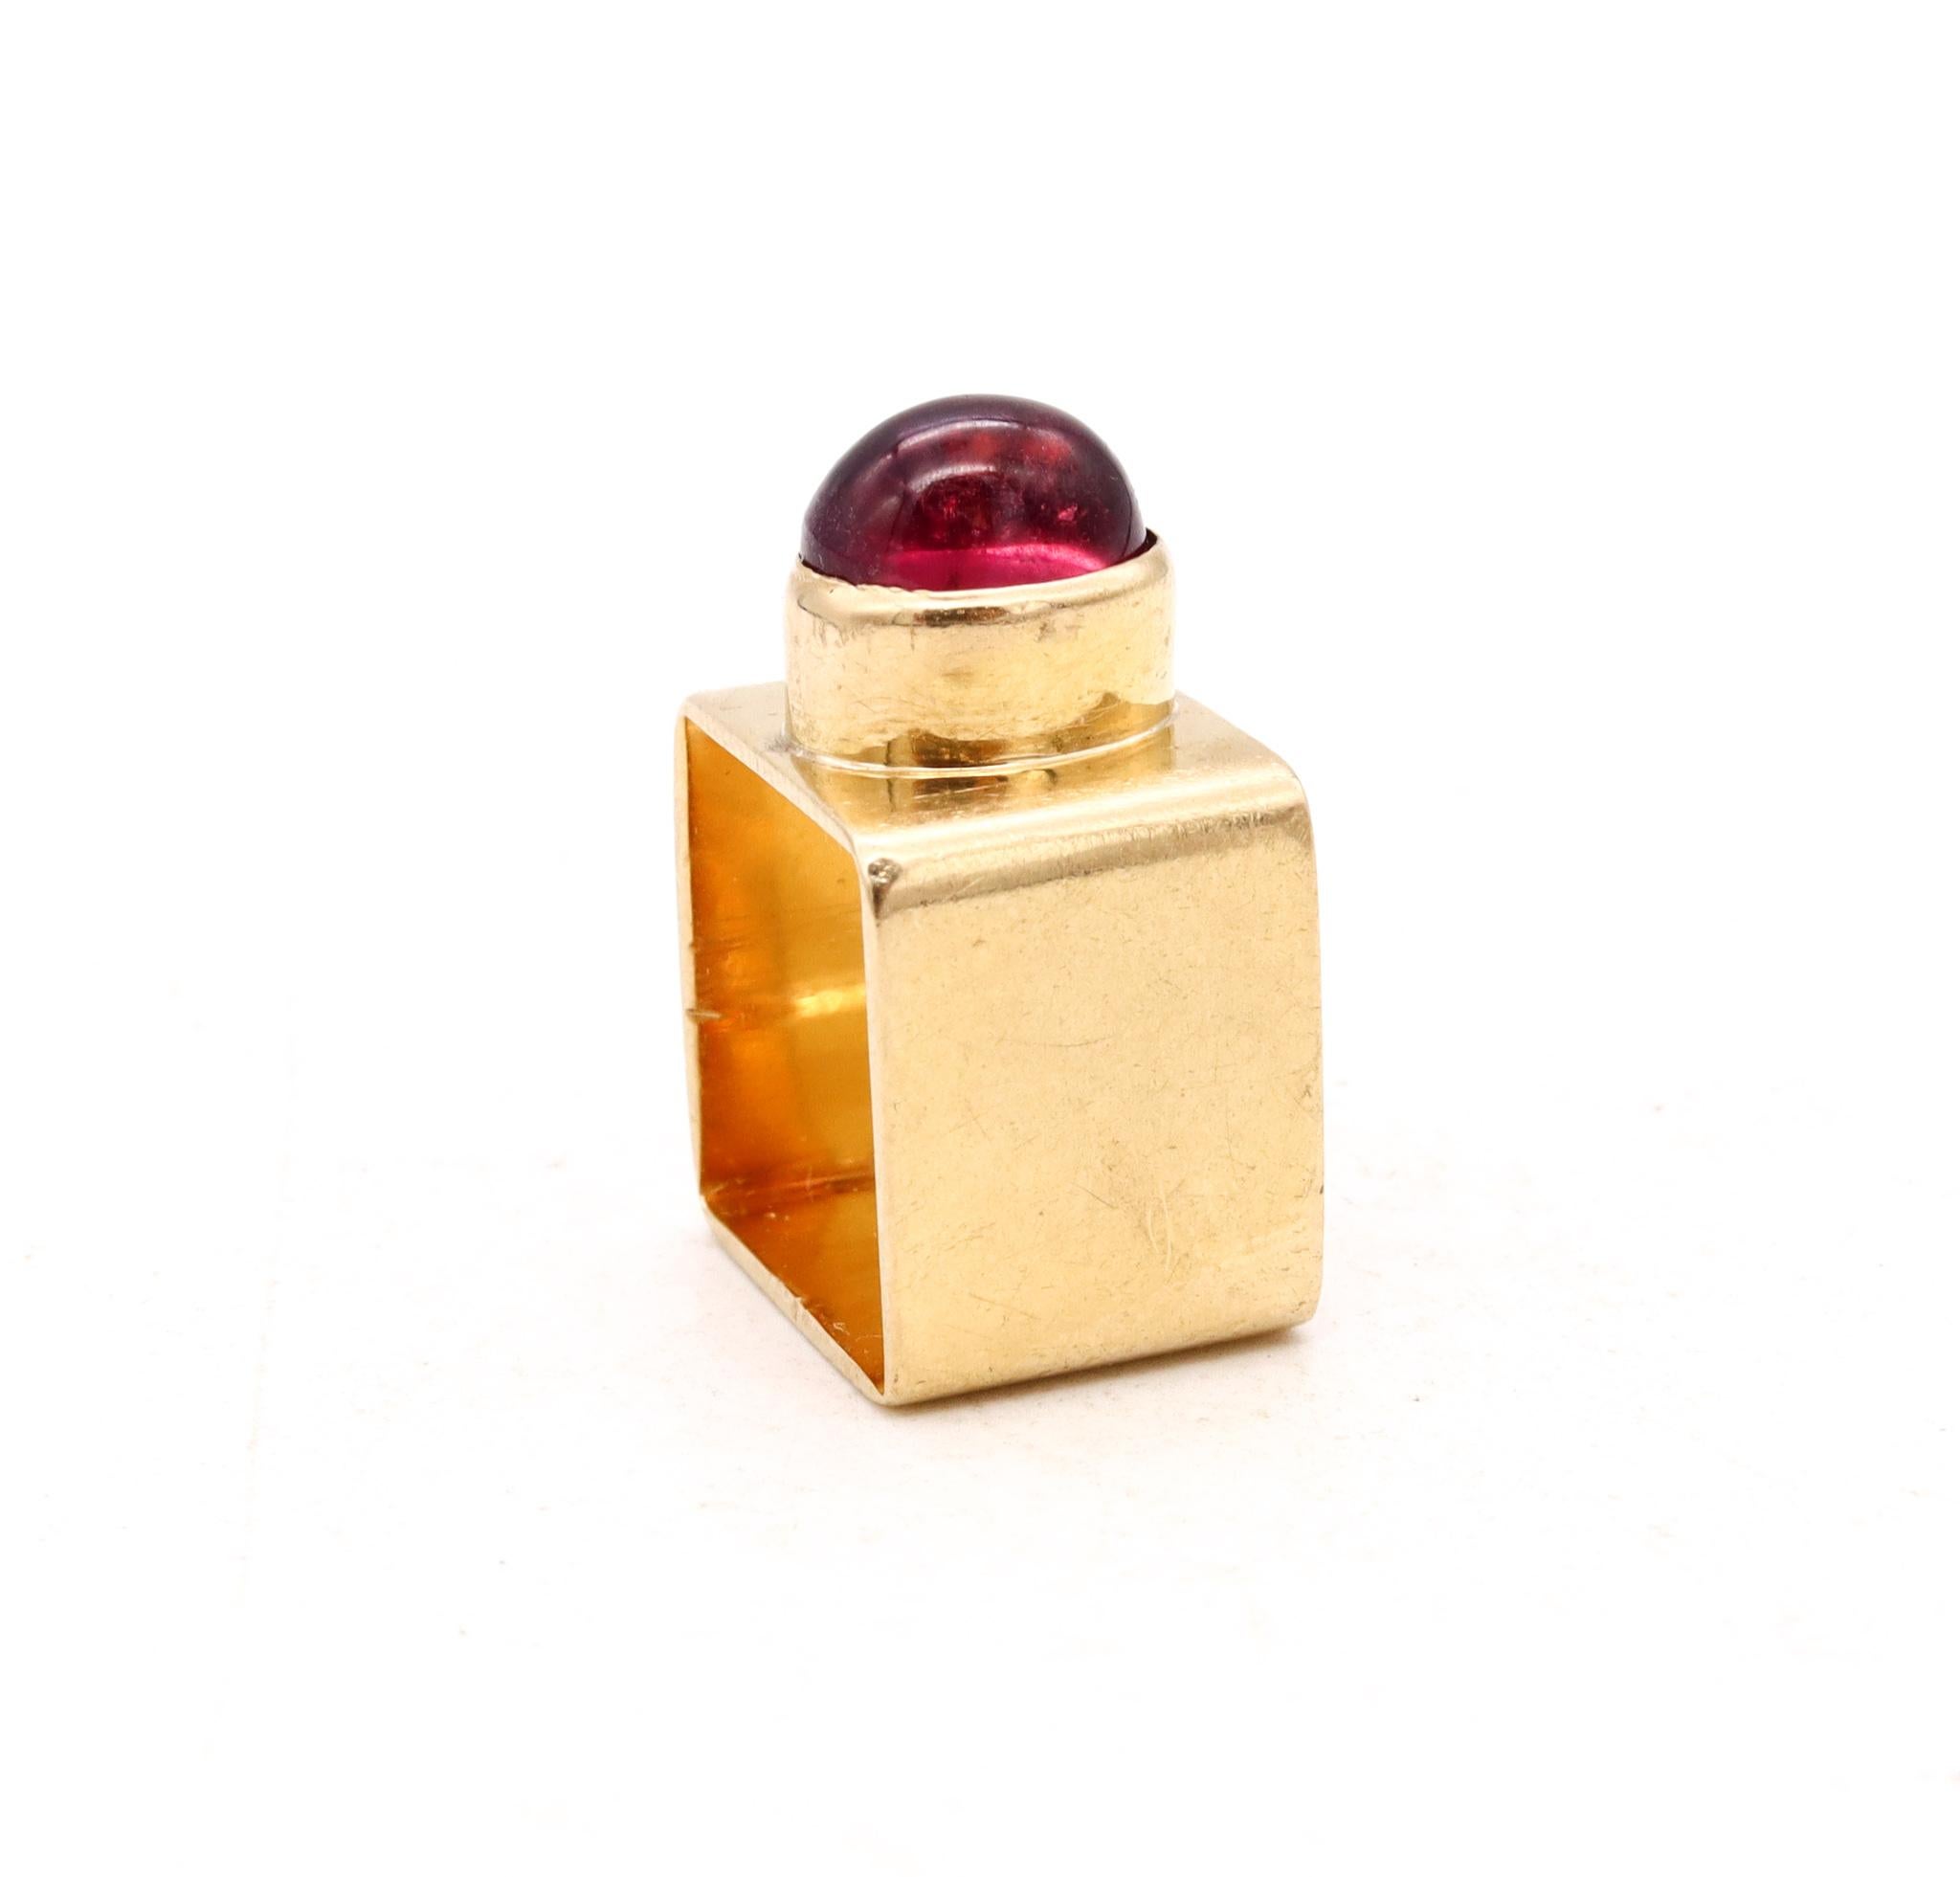 Cabochon Cartier 1968 Paris Dinh Van 18Kt Gold Geometric Ring 3.27 Cts Red Tourmaline For Sale